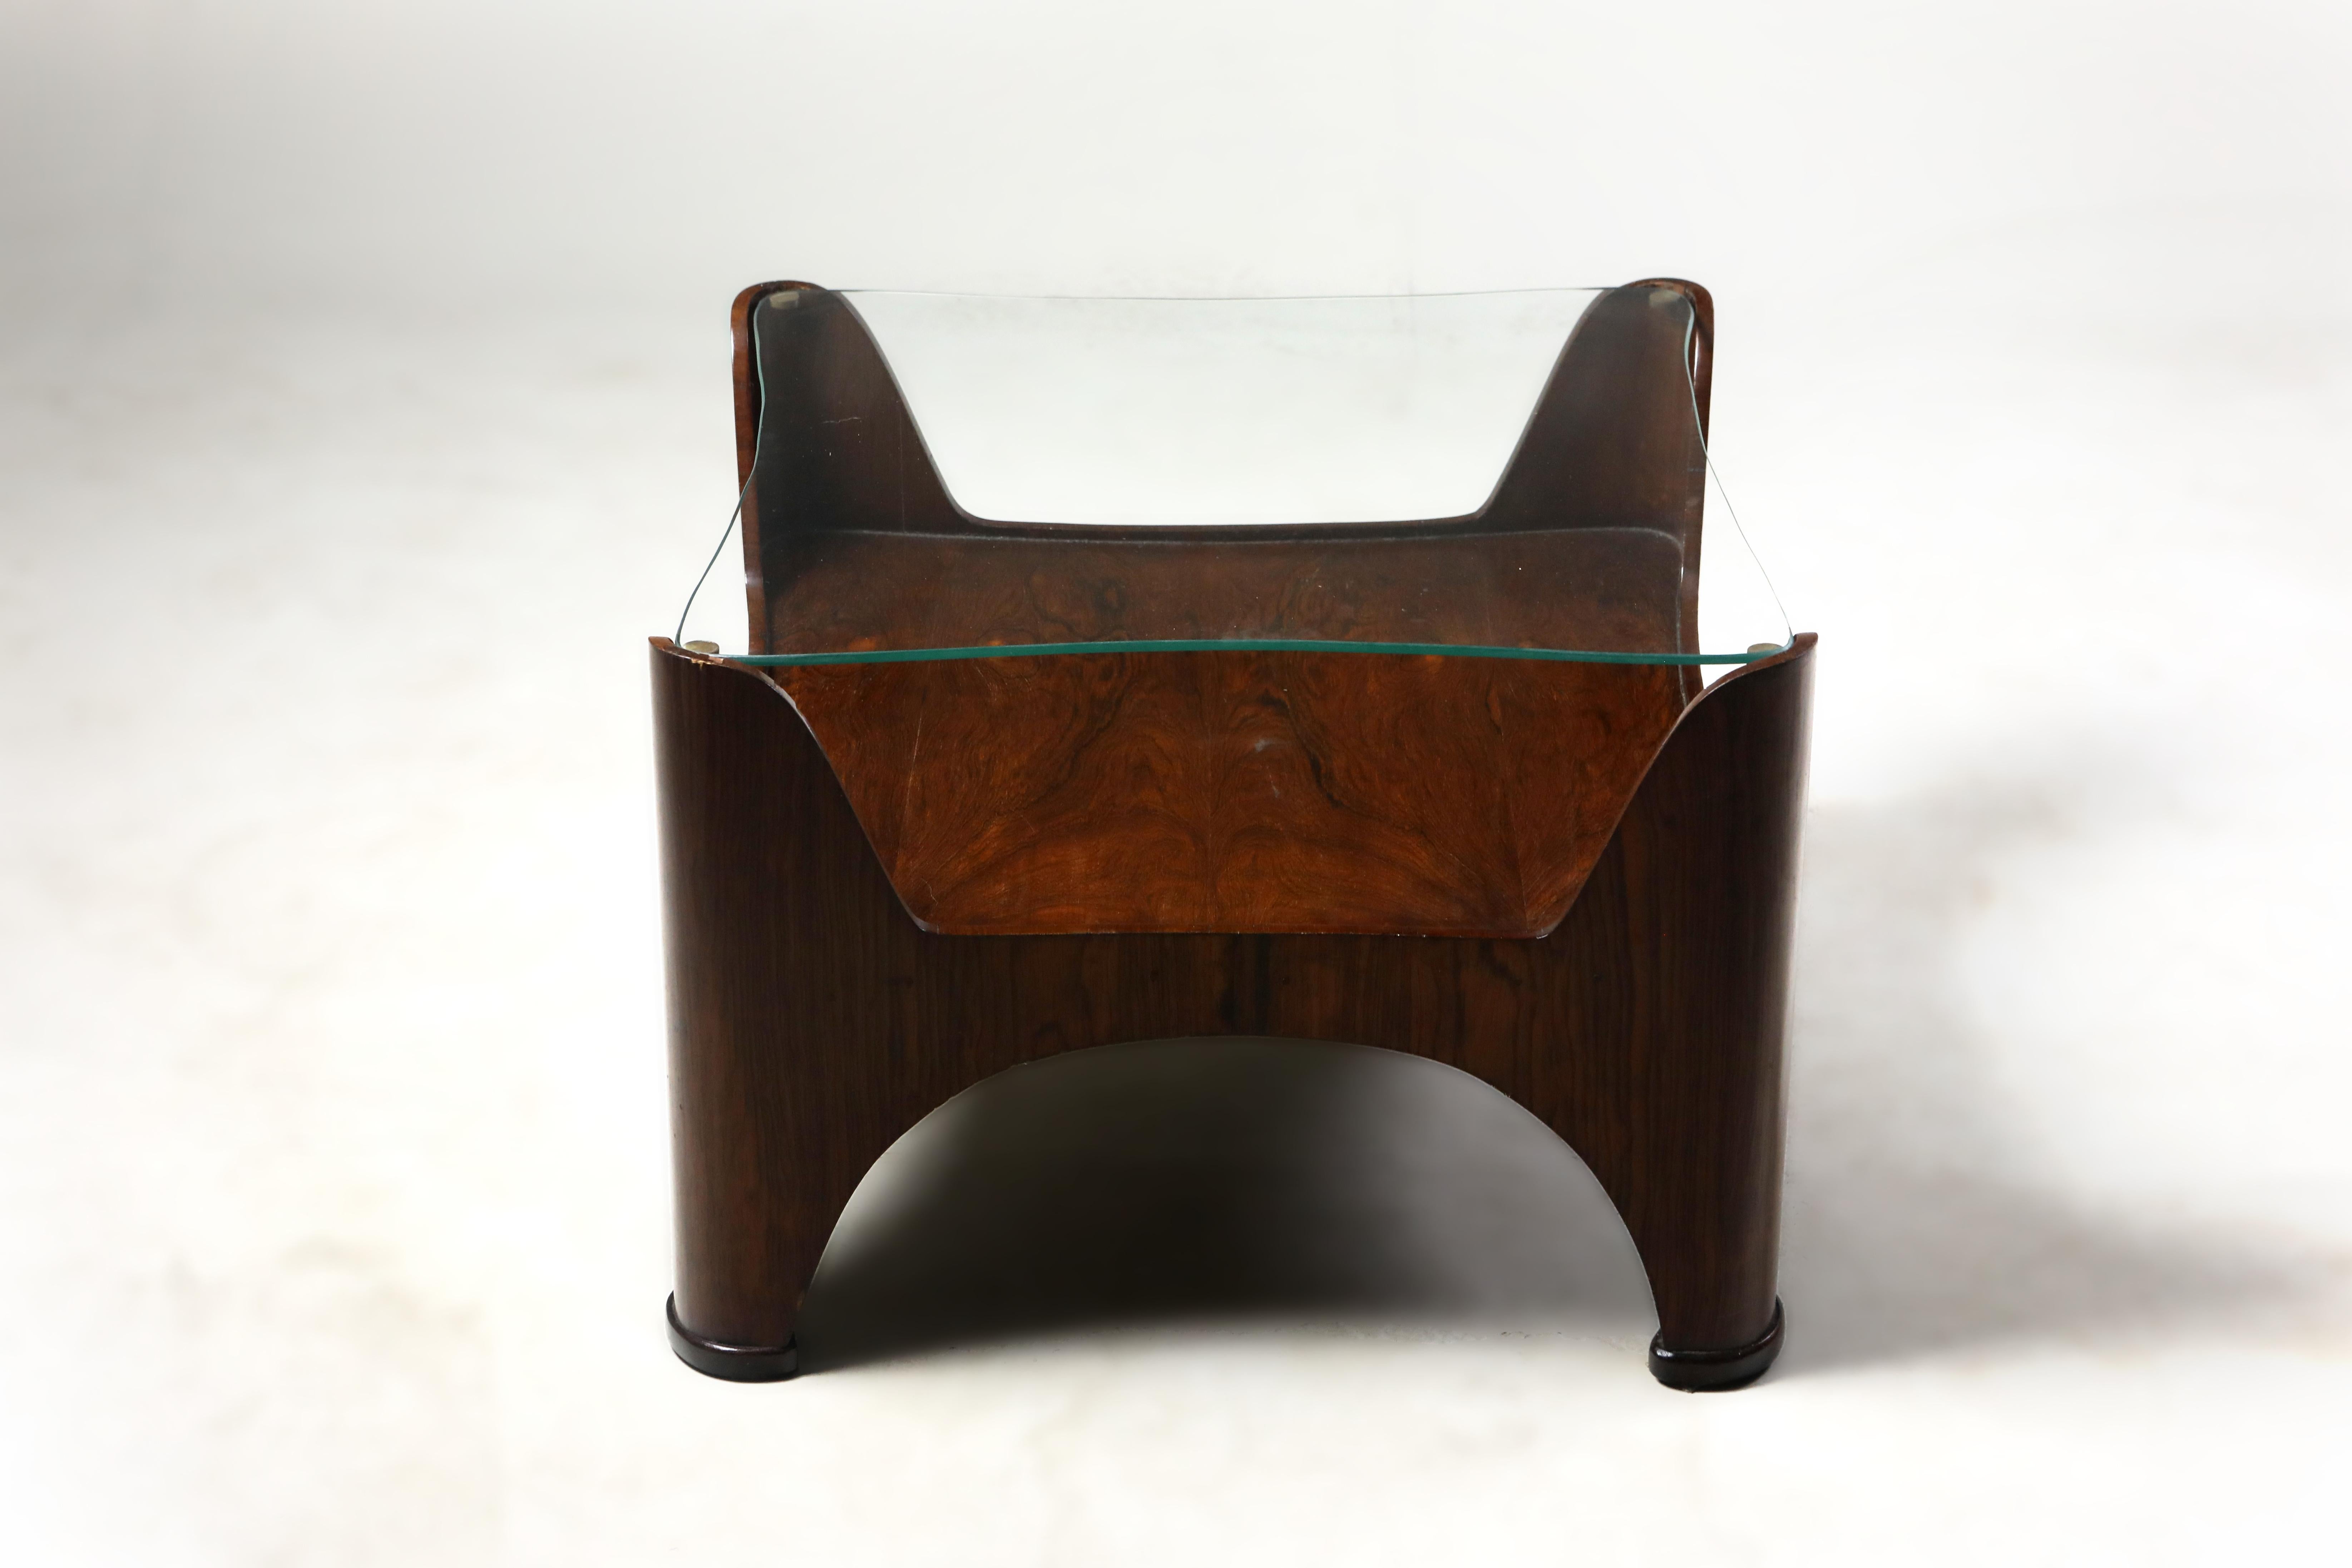 Brazilian Mid-Century Modern Square Glass-Top Hardwood End Table, Brazil, 1960s For Sale